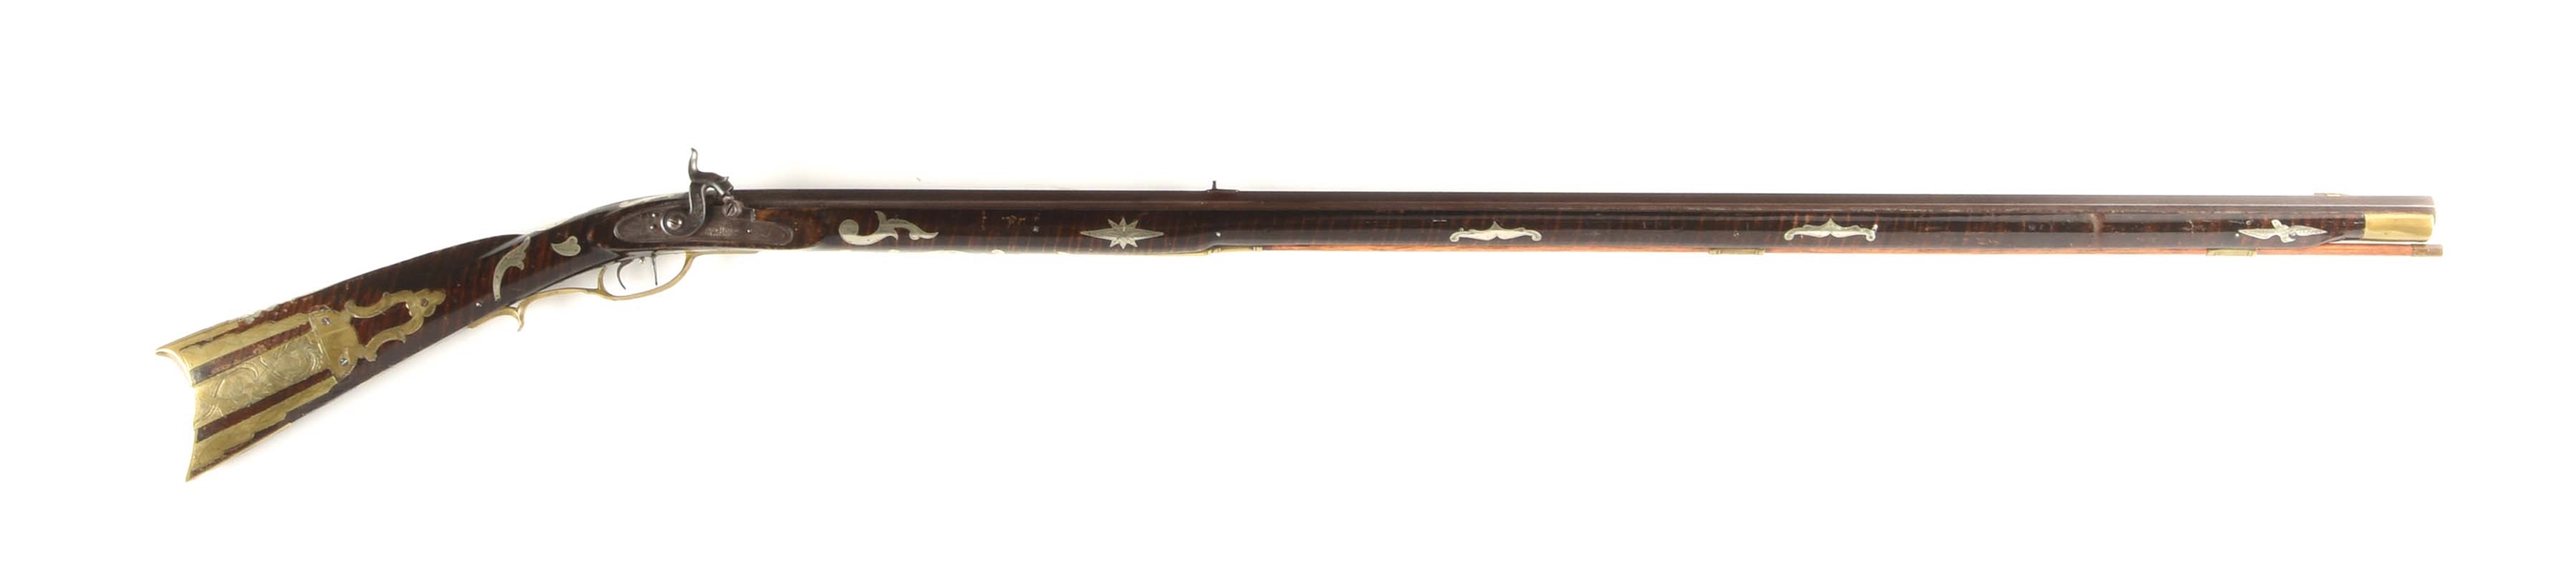 (A) FINE HUNTINGDON COUNTY PERCUSSION KENTUCKY LONGRIFLE SIGNED DOUGLASS WITH 34 SILVER INLAYS.